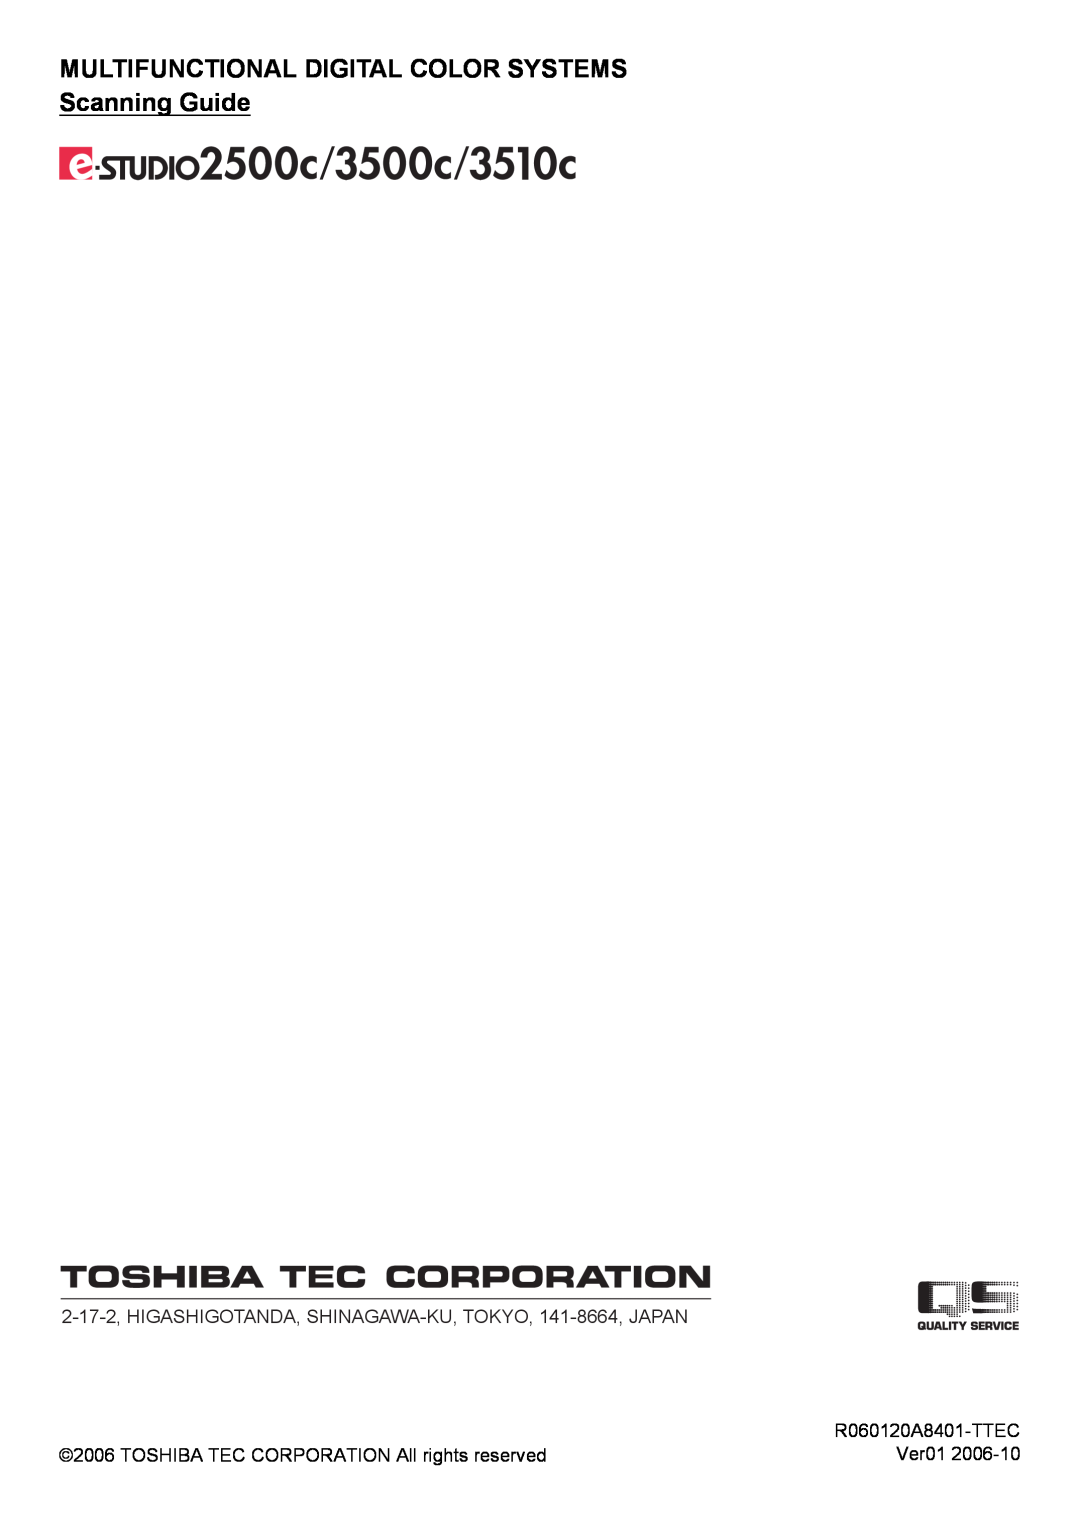 Toshiba 3510C, 3500C, 2500C manual MULTIFUNCTIONAL DIGITAL COLOR SYSTEMS Scanning Guide, R060120A8401-TTEC 